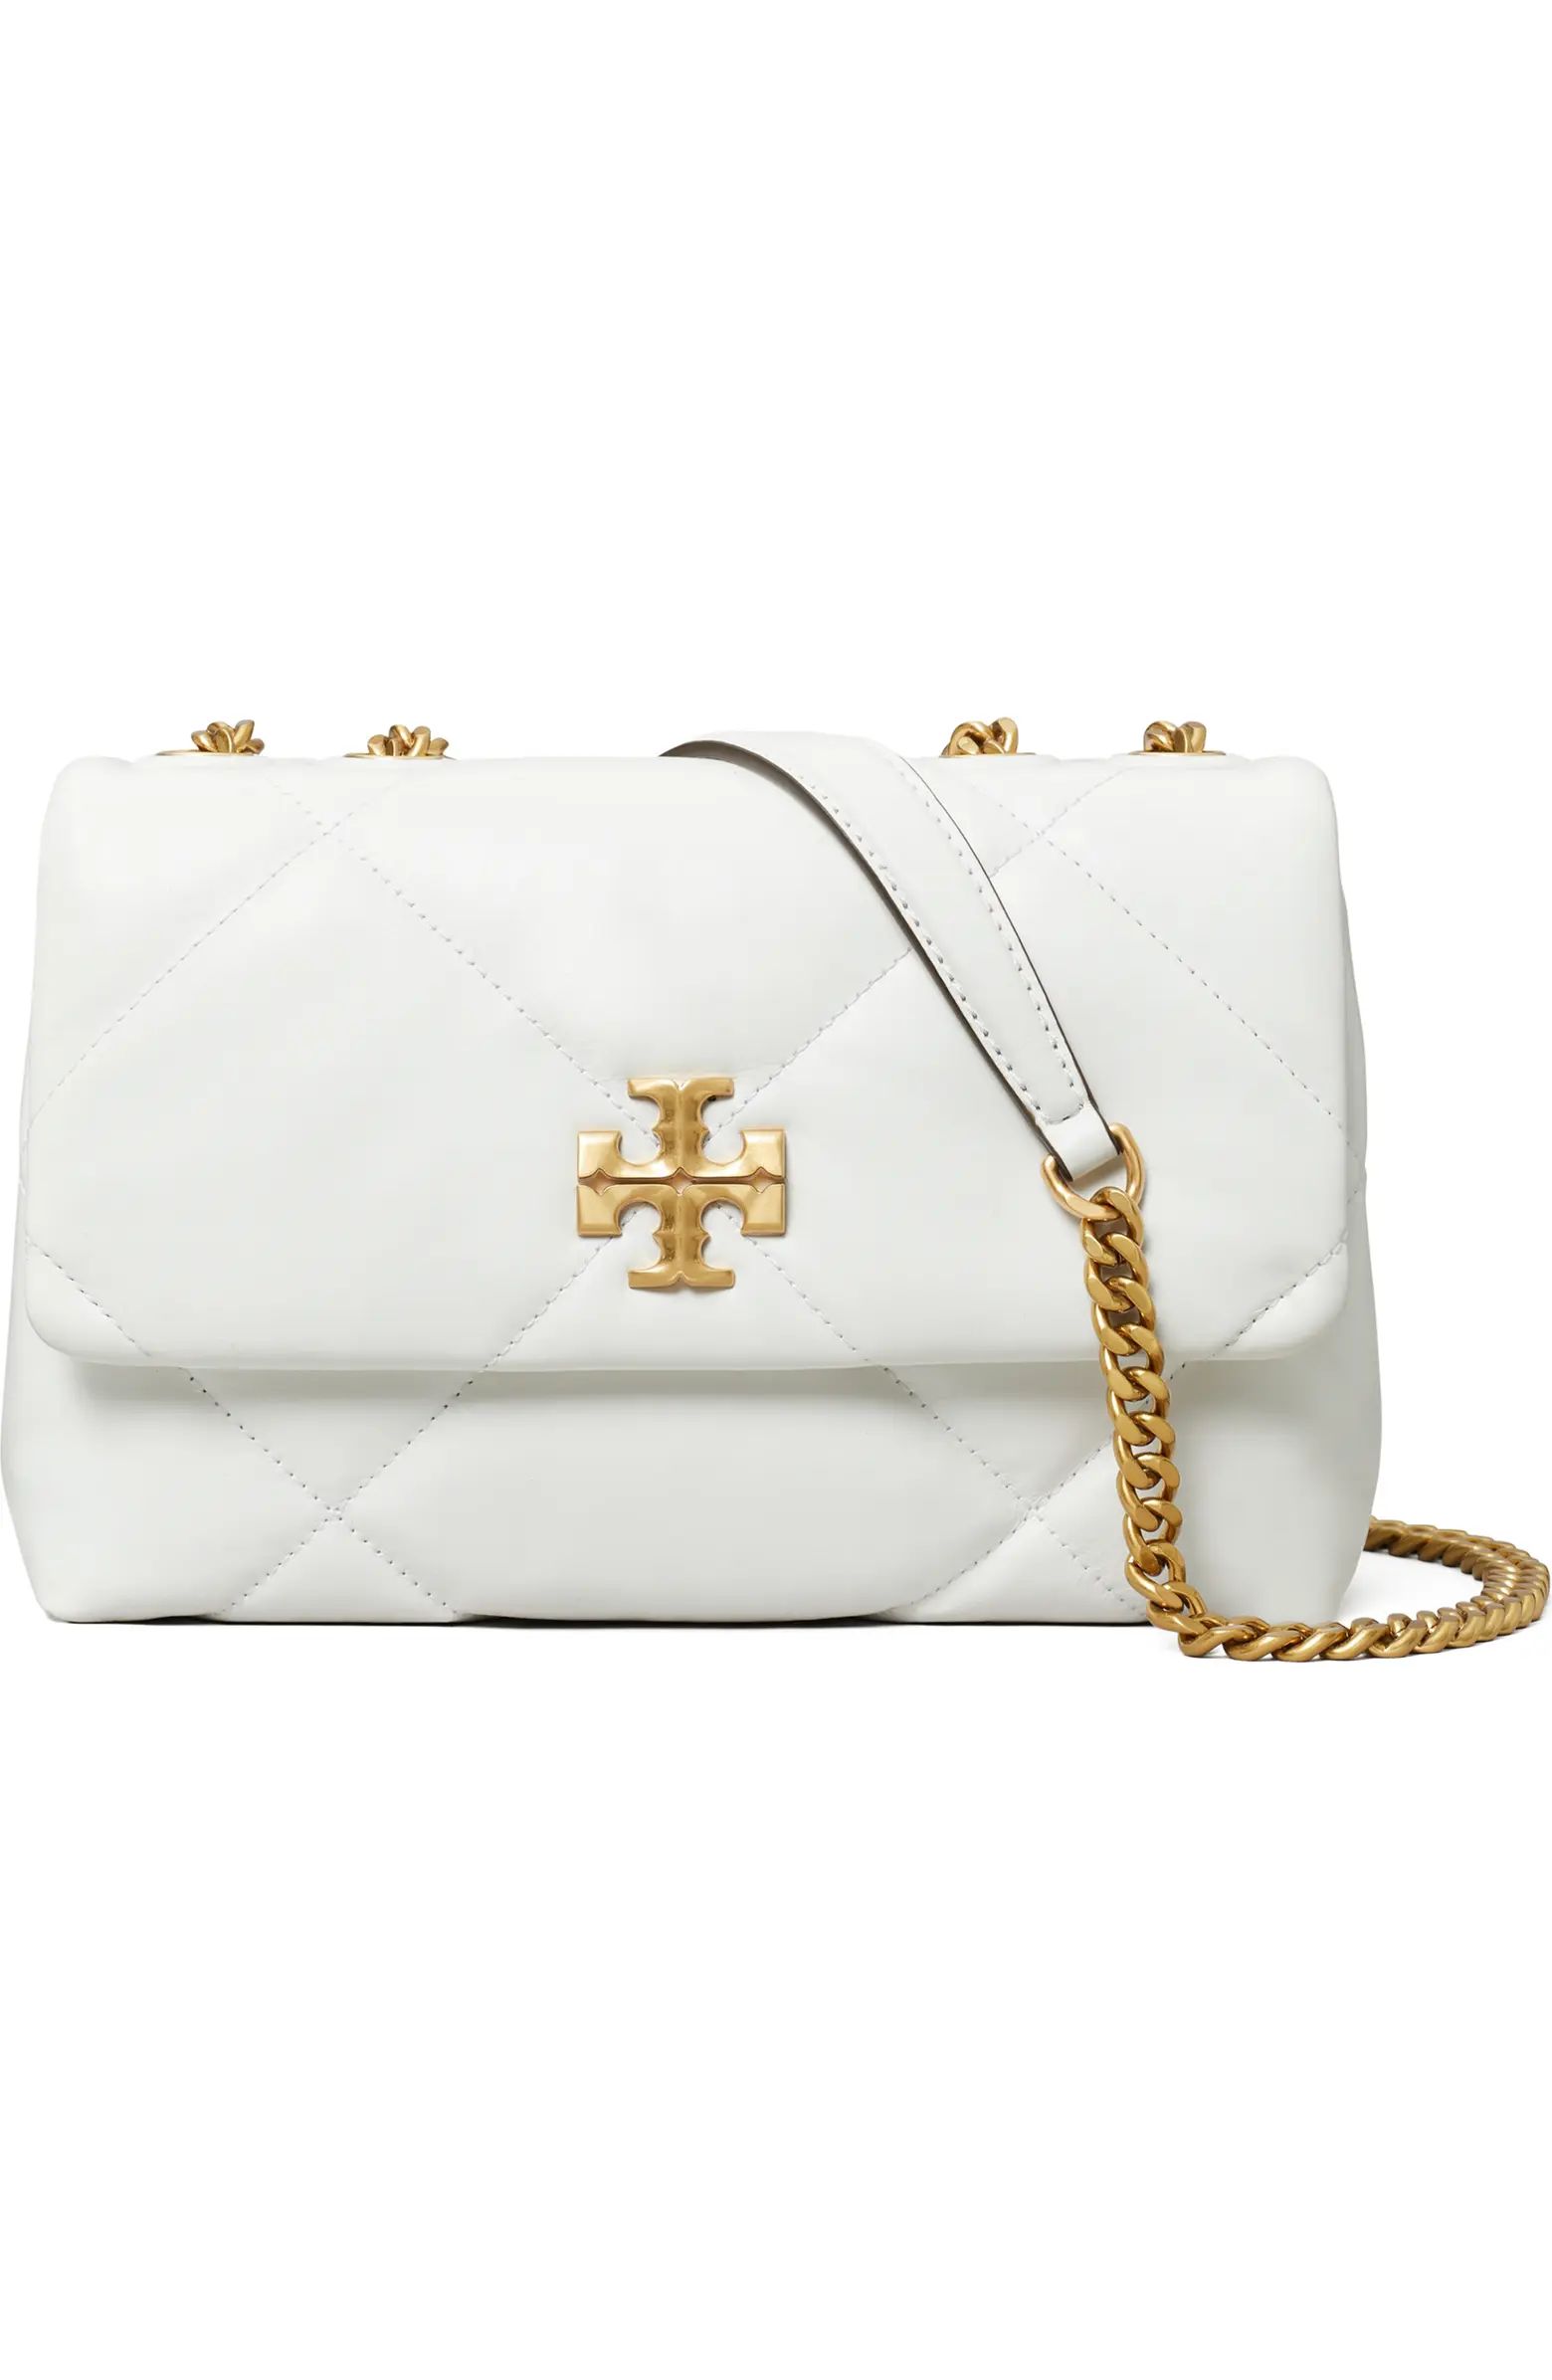 Tory Burch Small Kira Diamond Quilted Convertible Leather Shoulder Bag | Nordstrom | Nordstrom